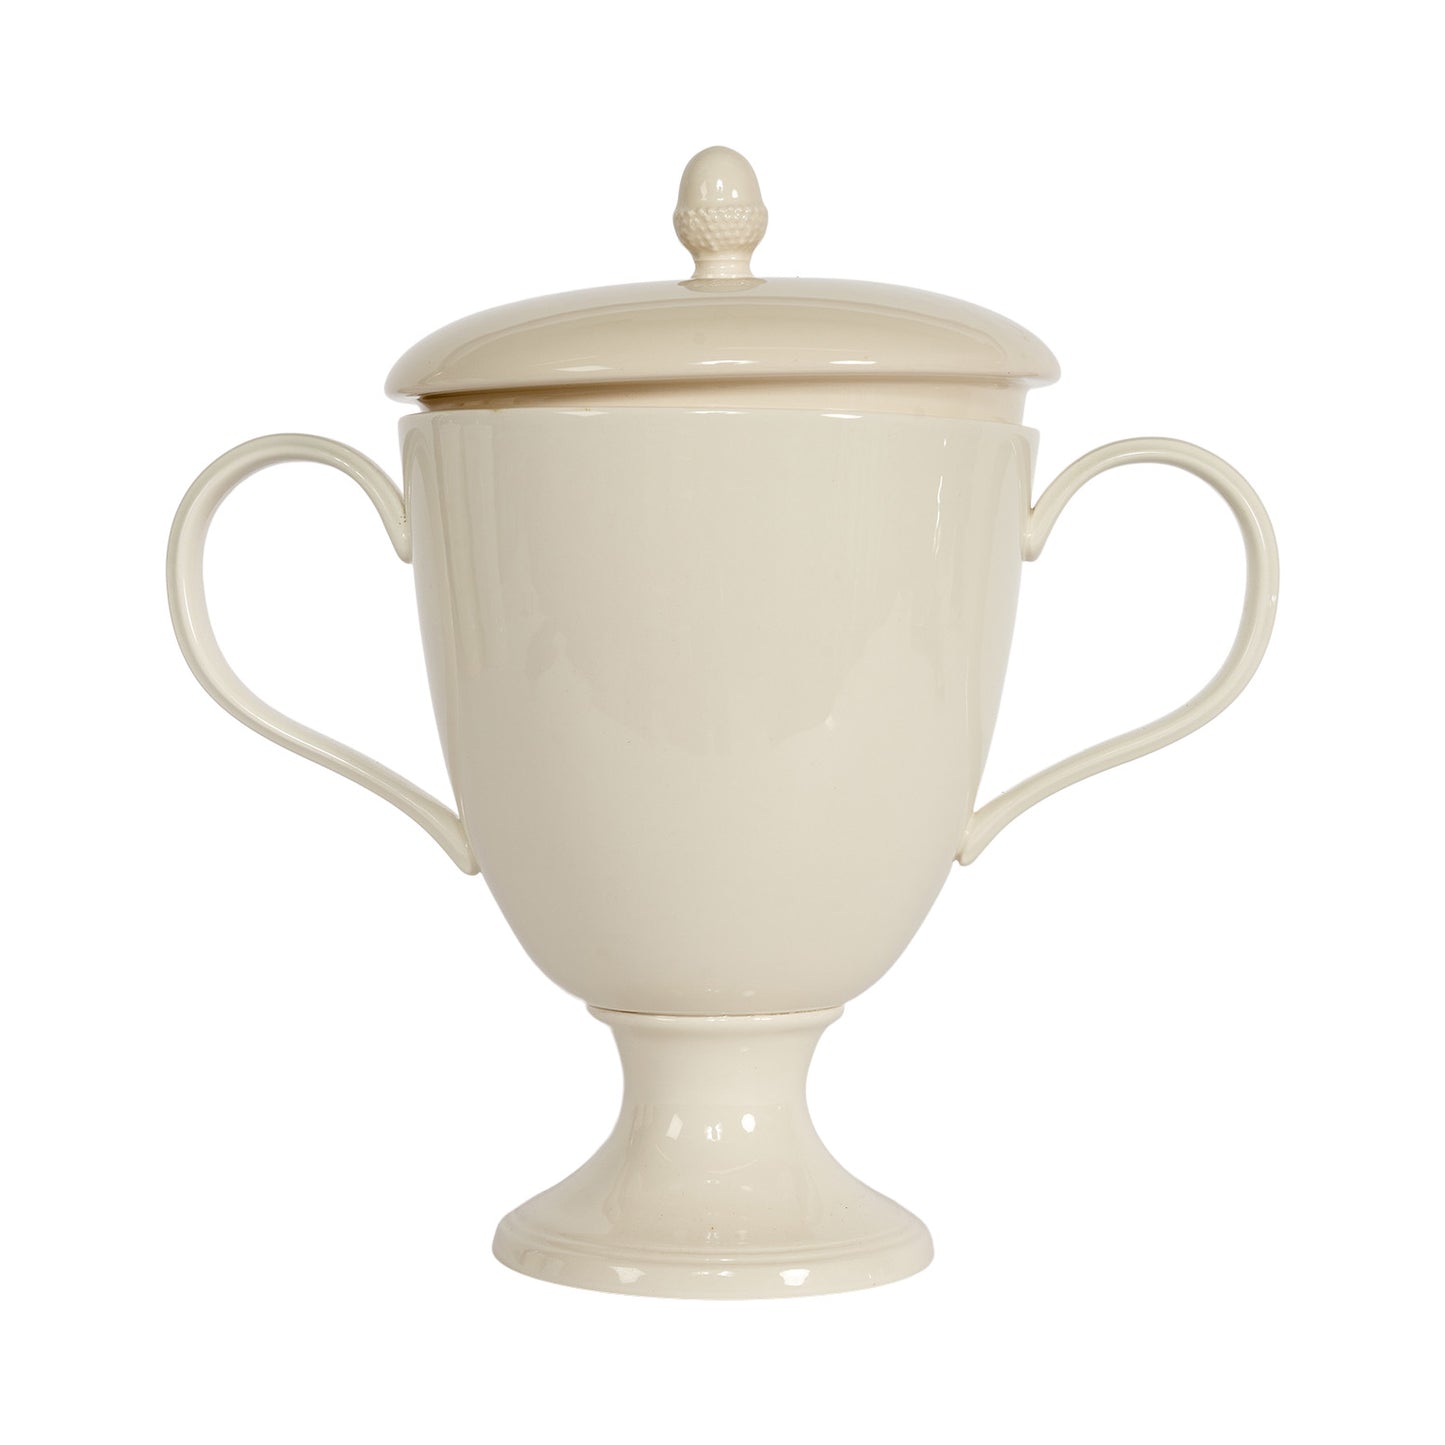 P&H Creamware Lidded Urn with Handles